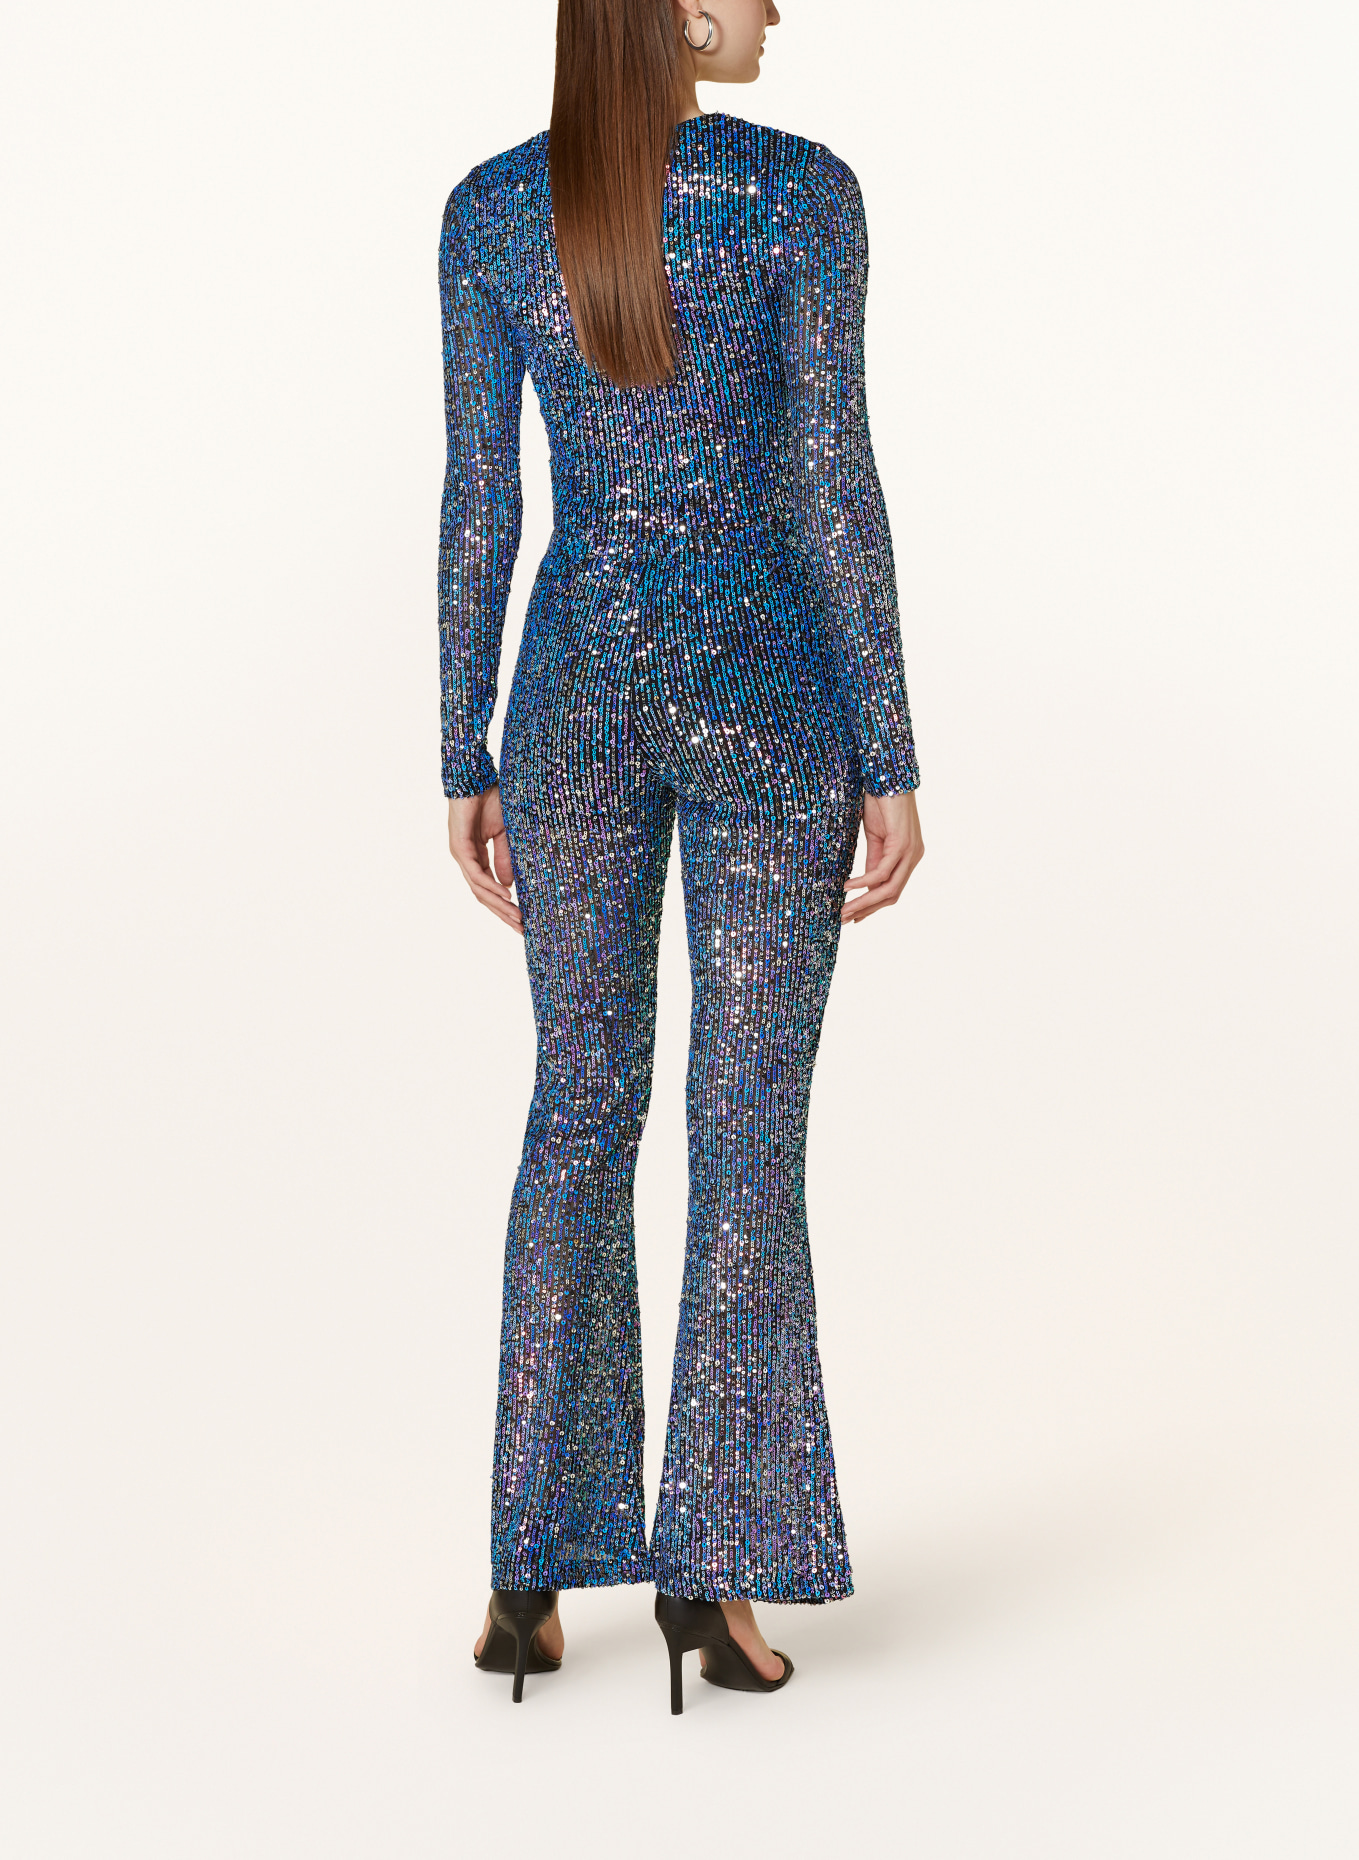 COLOURFUL REBEL Mesh trousers STEFFIE with sequins, Color: BLUE/ LIGHT PURPLE/ SILVER (Image 3)